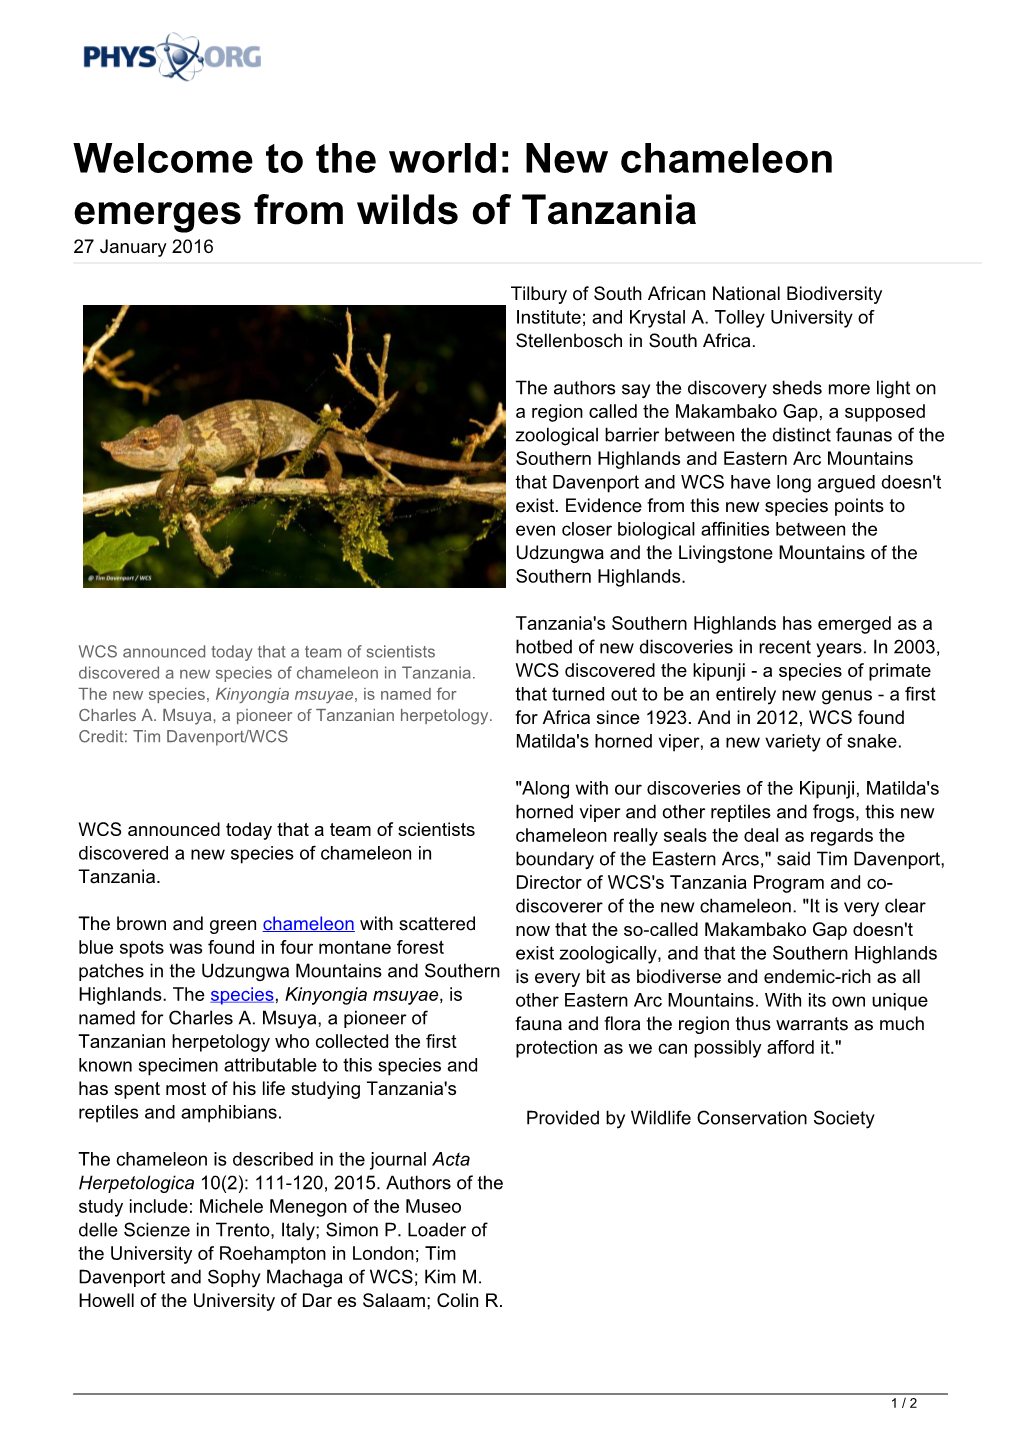 The World: New Chameleon Emerges from Wilds of Tanzania 27 January 2016